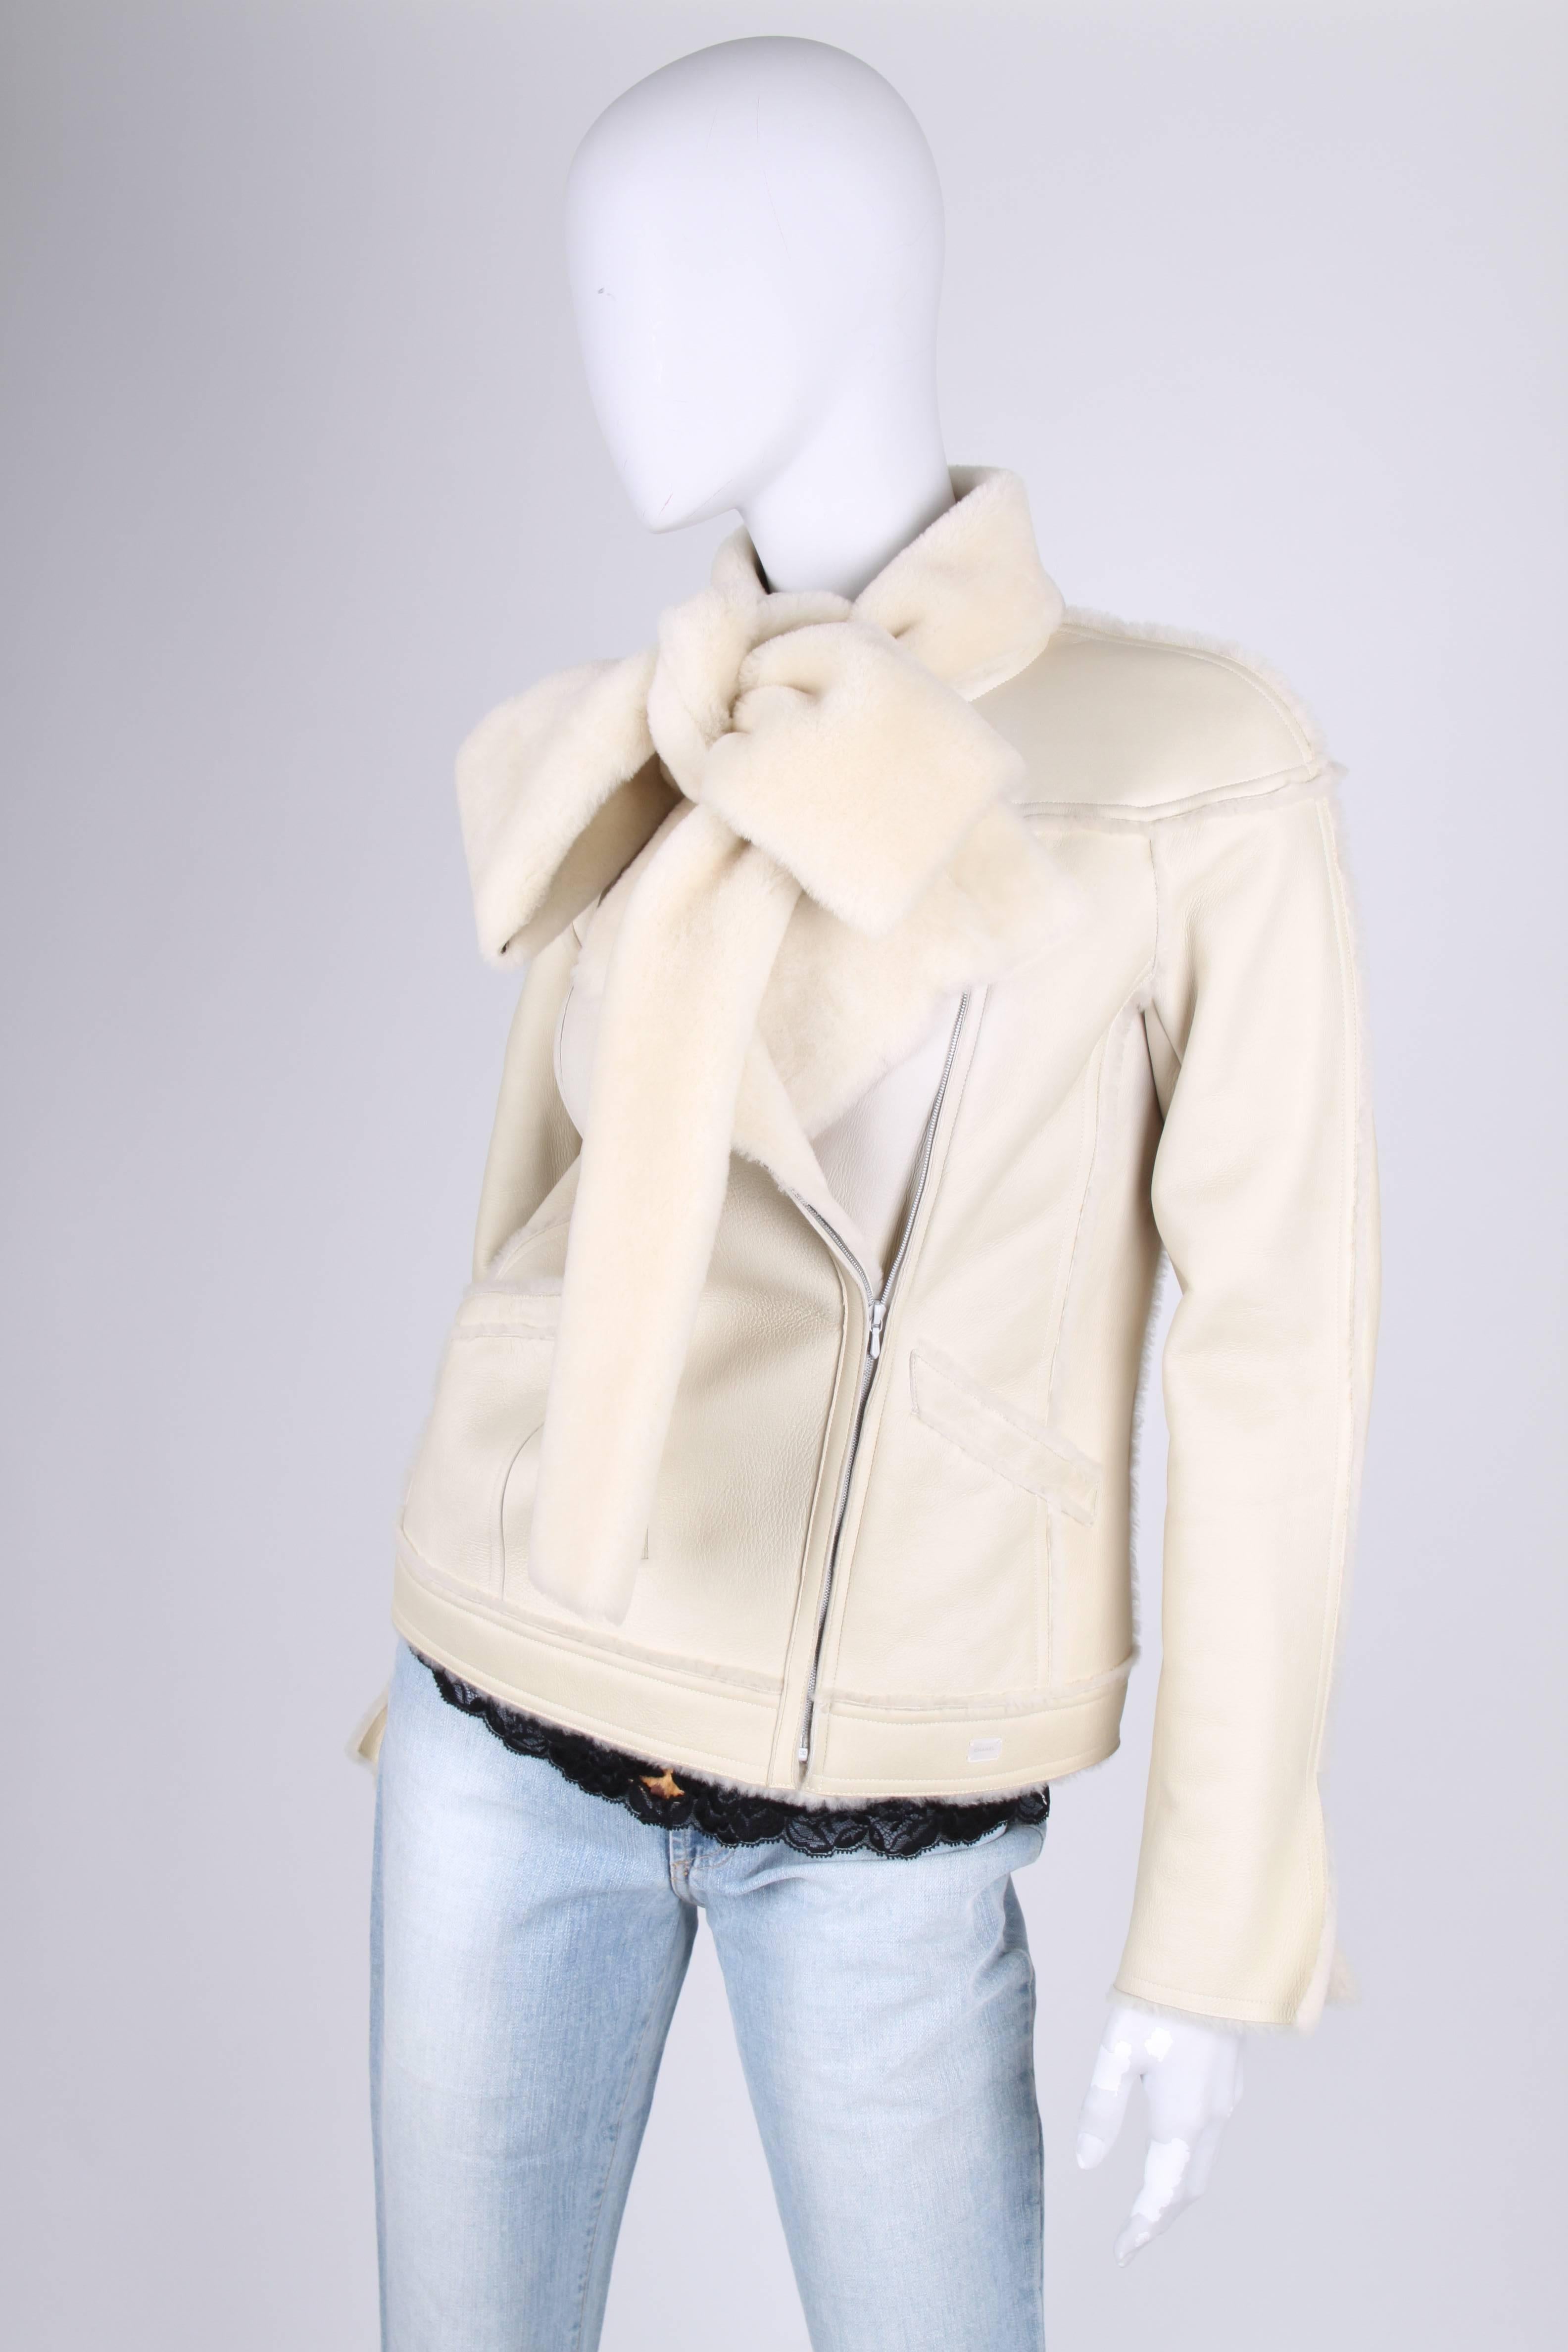 Fantastic lammy by Chanel!

This off-white coat has a diagonal zipper at the front, welt pockets and a collar with a scarf which can be tied into a bow. A slit at the end of the long sleeves. The interior is of course made of nice and soft lambskin